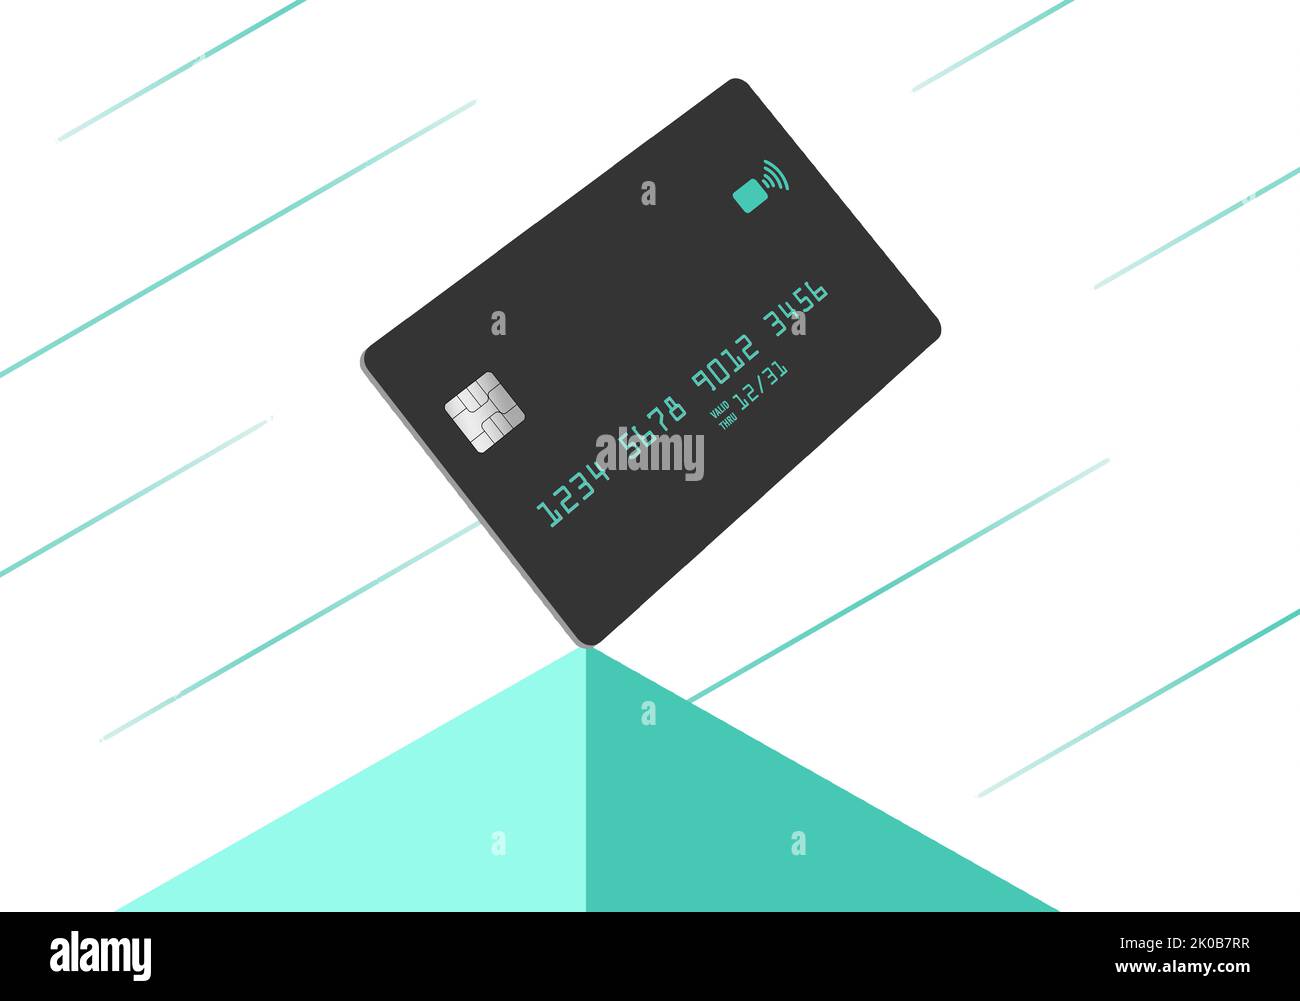 A modern dark grey credit card is seen atop a pyramid with a striped light green background in this 3-d illustration. Stock Photo